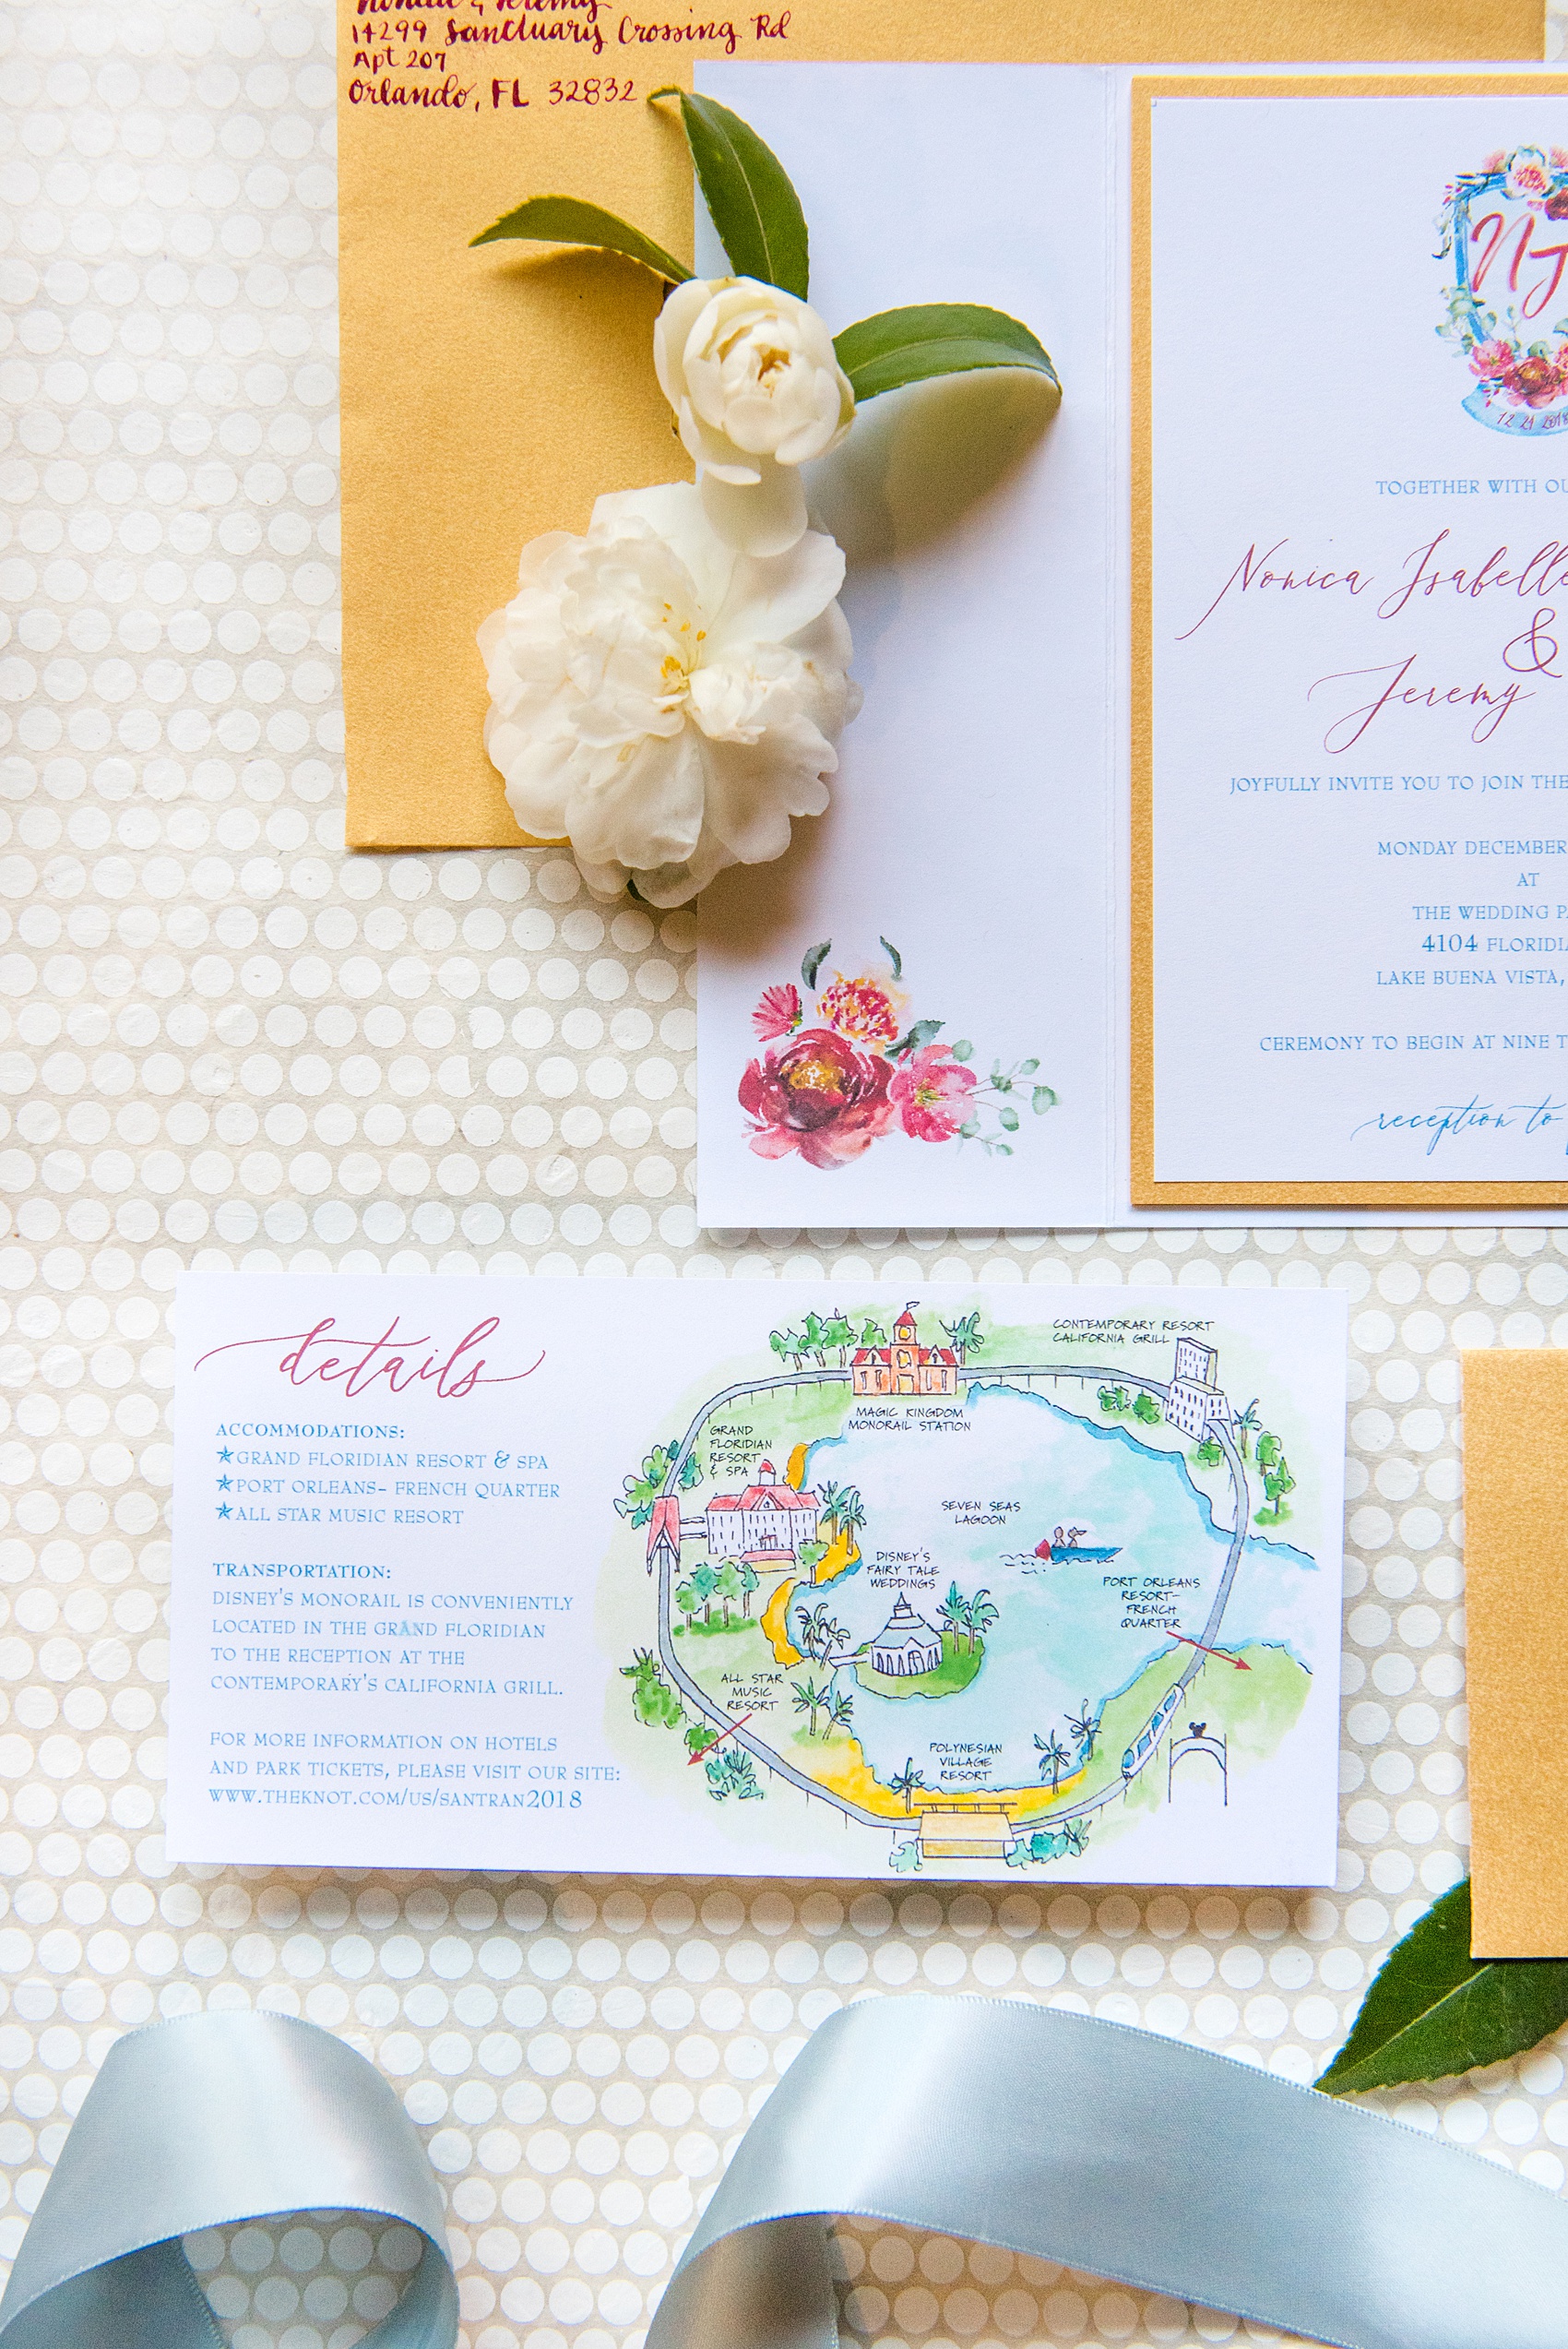 Photographs of a Walt Disney World wedding by Mikkel Paige Photography will give you ideas for a tasteful Beauty and the Beast theme. The awesome invitation had a custom watercolor by Watercolor Design Studio of the couple’s dog, Cinderella’s castle, and the Seven Seas Lagoon. The bride and groom managed beautiful details for their dream ceremony and reception even on a small budget. #disneywedding #disneybride #waltdisneyworld #DisneyWorldWedding #watercolorinvitation #disneyillustration